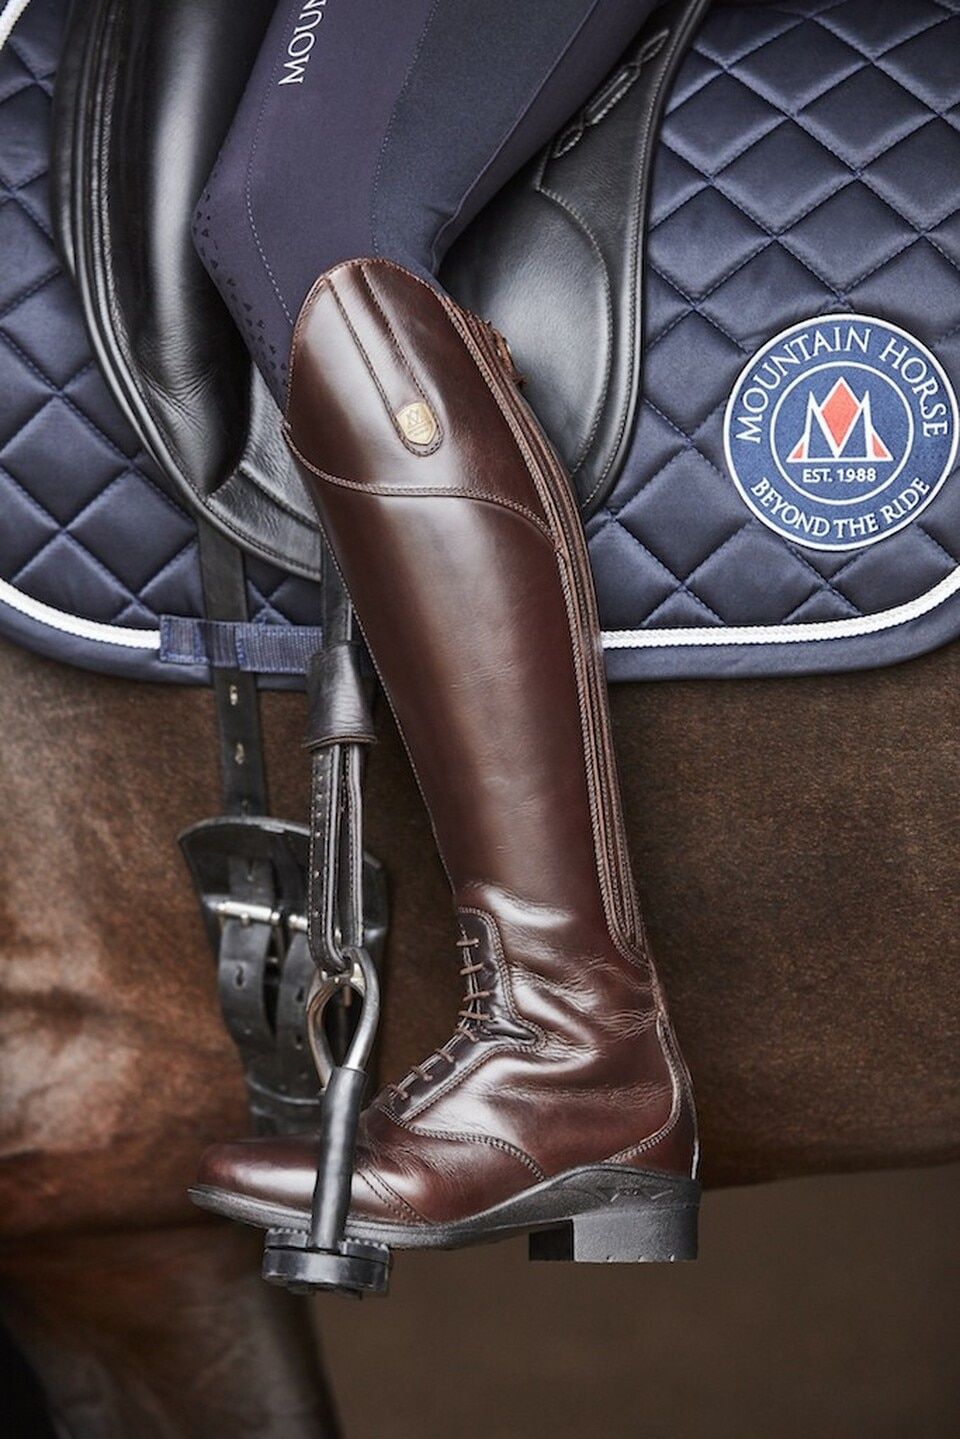 Brown Riding boots gives you a stunning
look